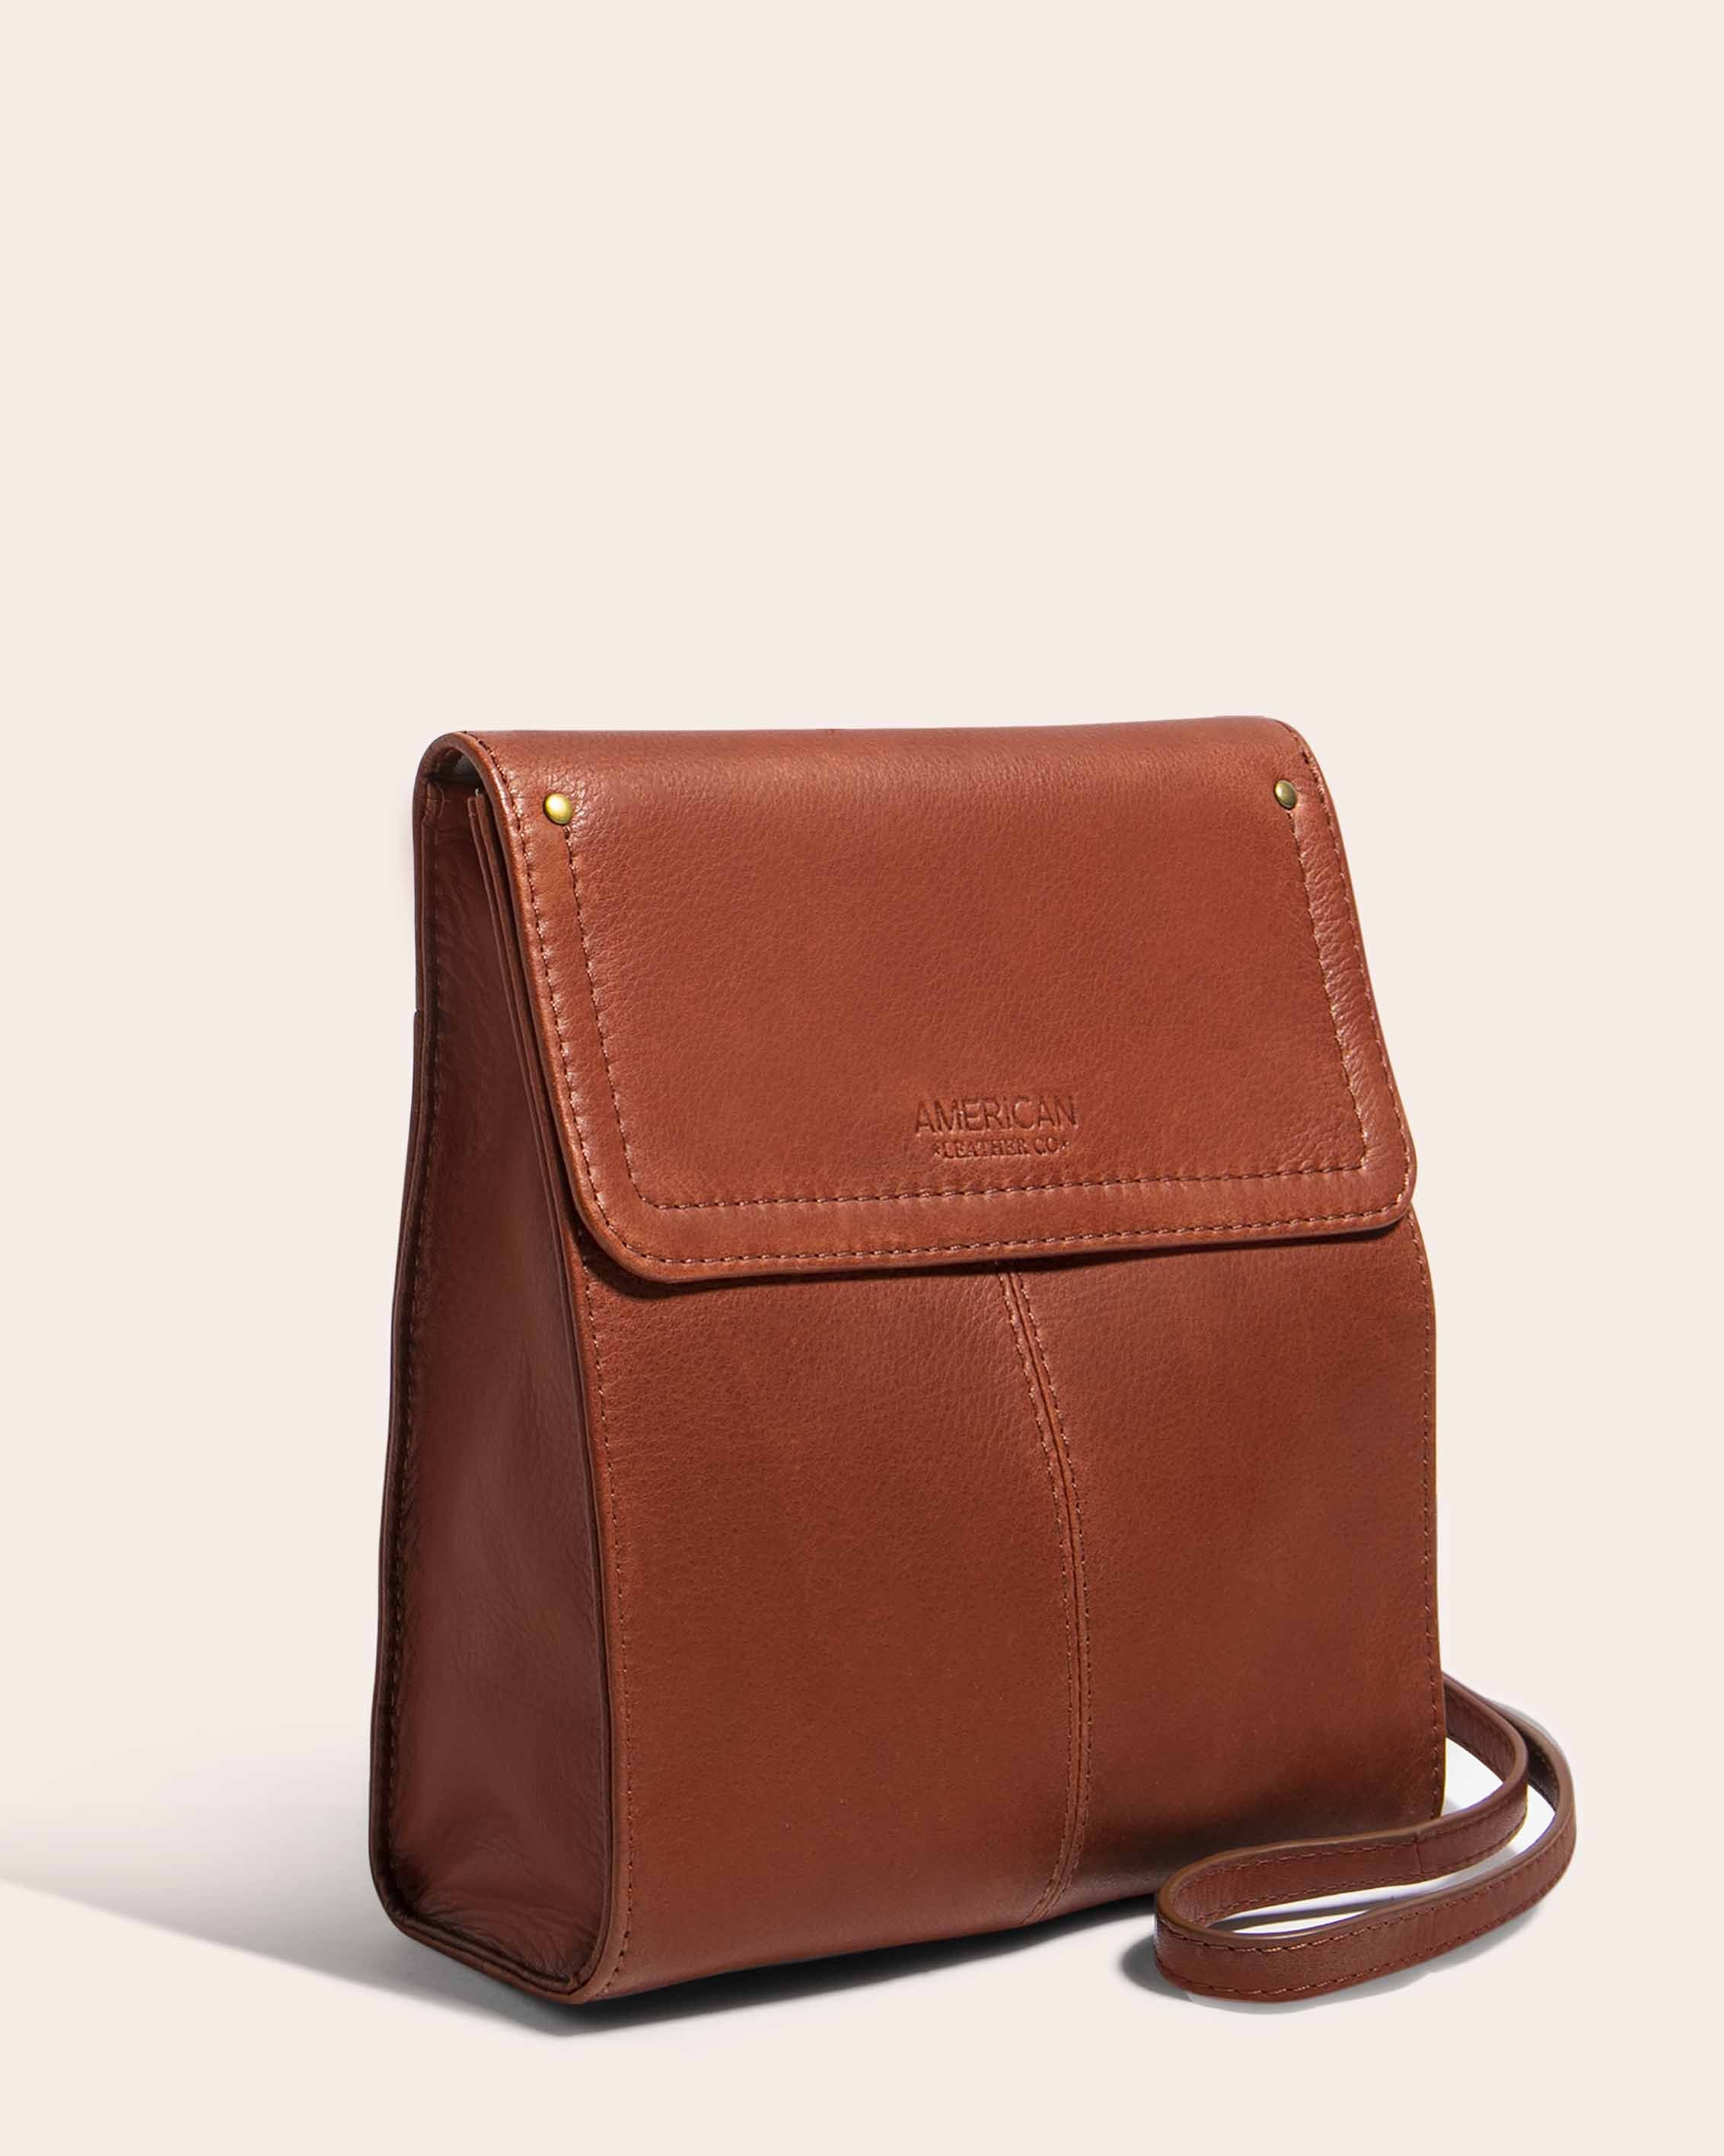 American Leather Co. Kansas Large Crossbody With RFID